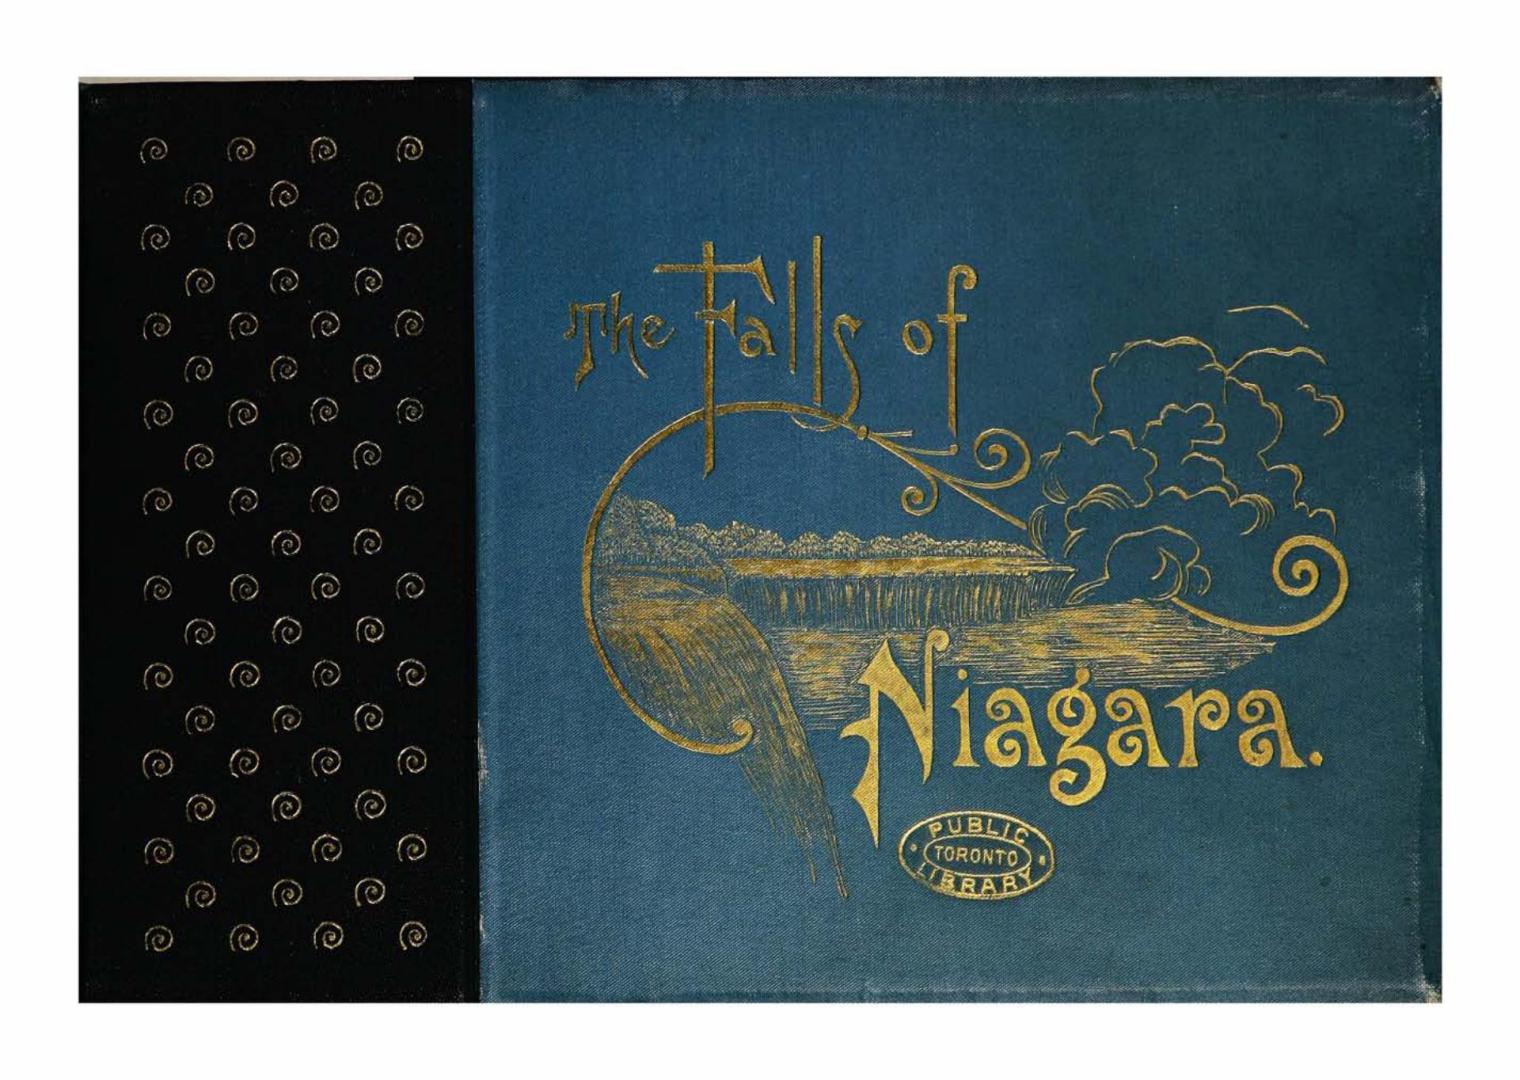 The falls of Niagara, depicted by pen and camera